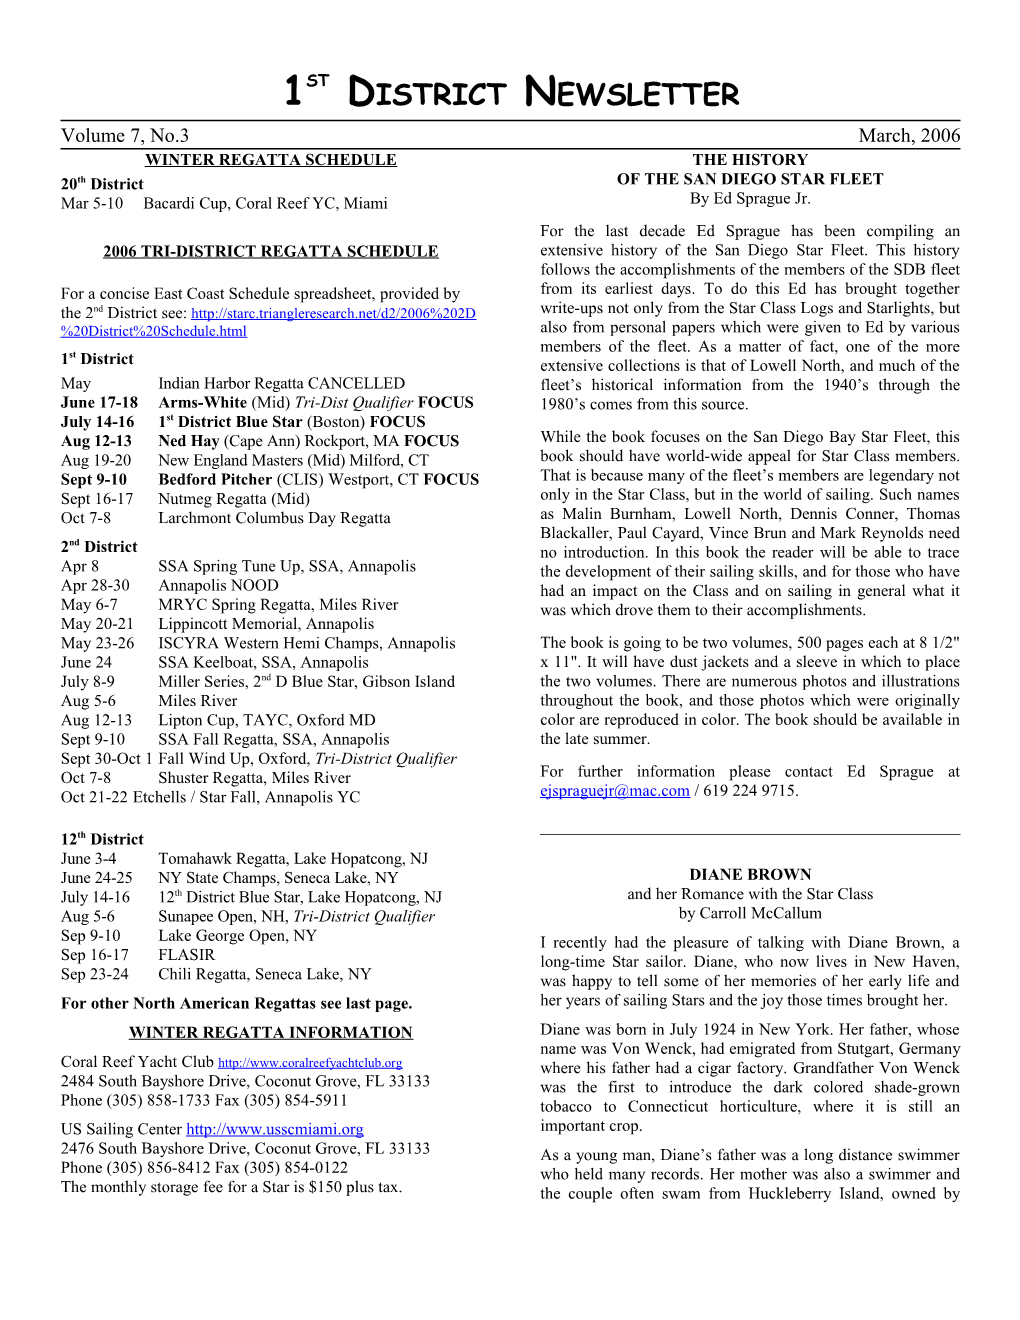 1St District Newsletter Page 6 March, 2006